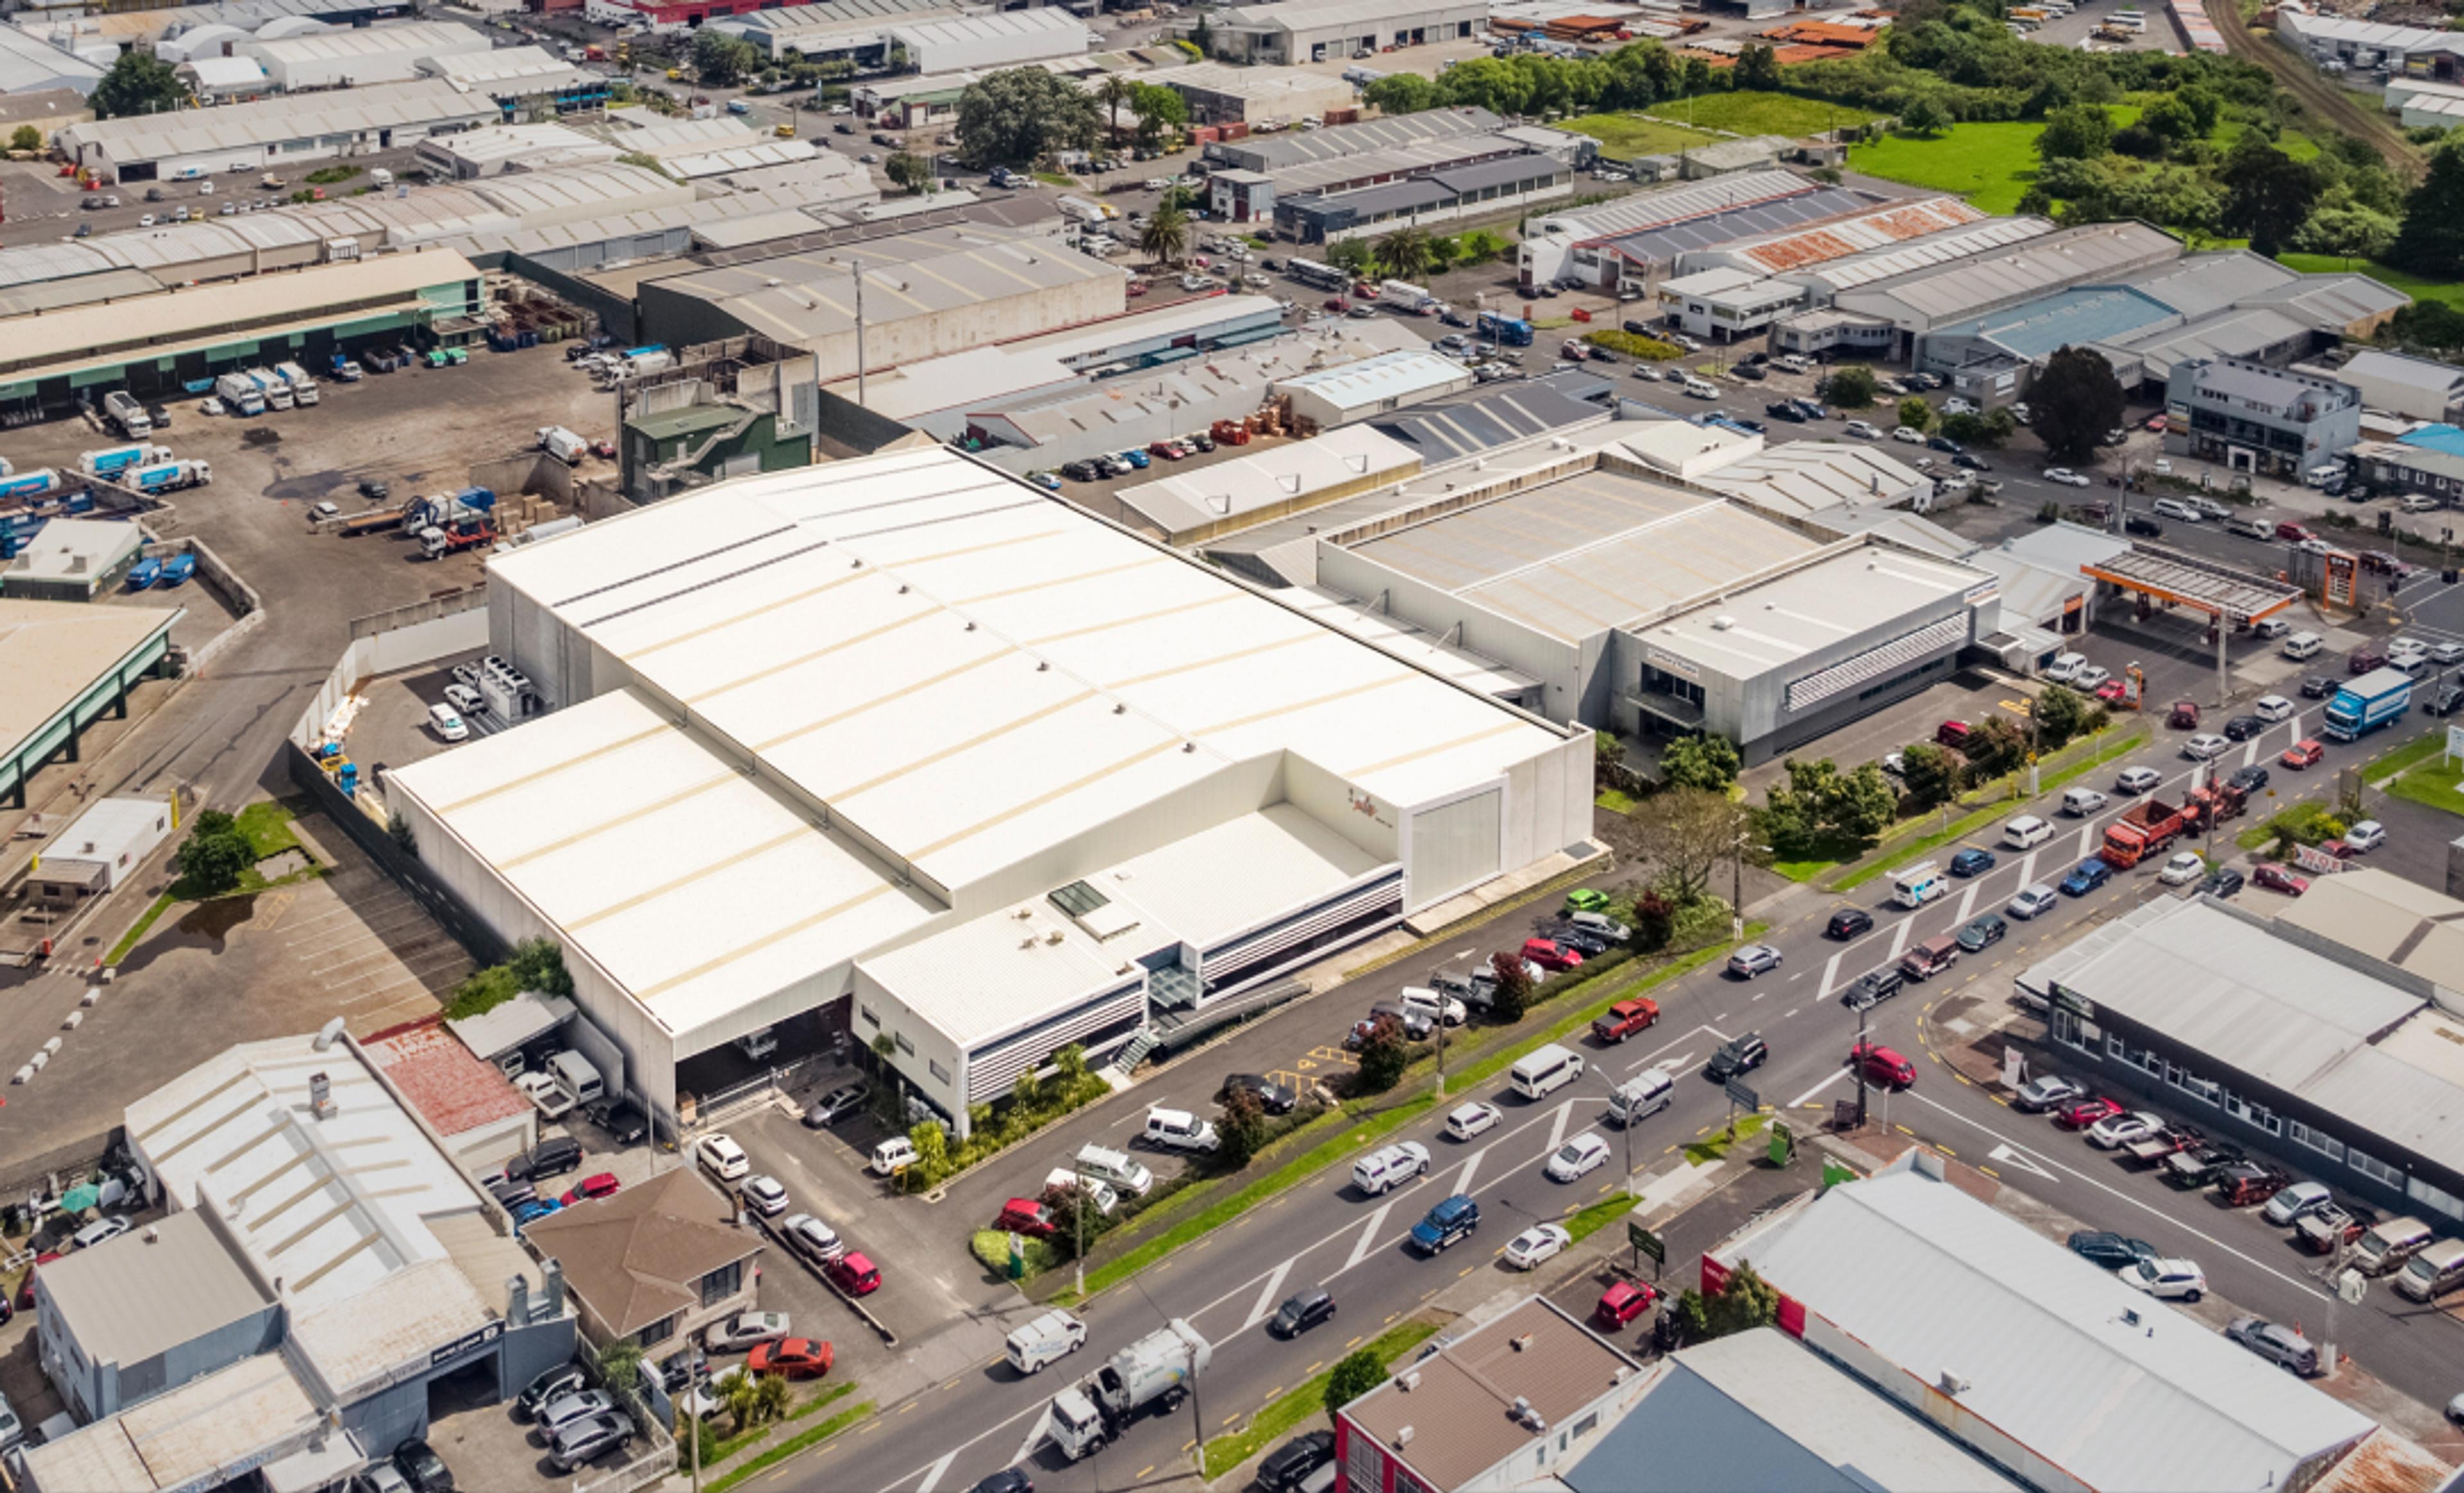 Church Street is a main arterial route connecting the established industrial suburbs of Onehunga, Penrose, and Mt Wellington, providing excellent access to key arterials including State Highway 1, and the South Western and South-Eastern motorways.